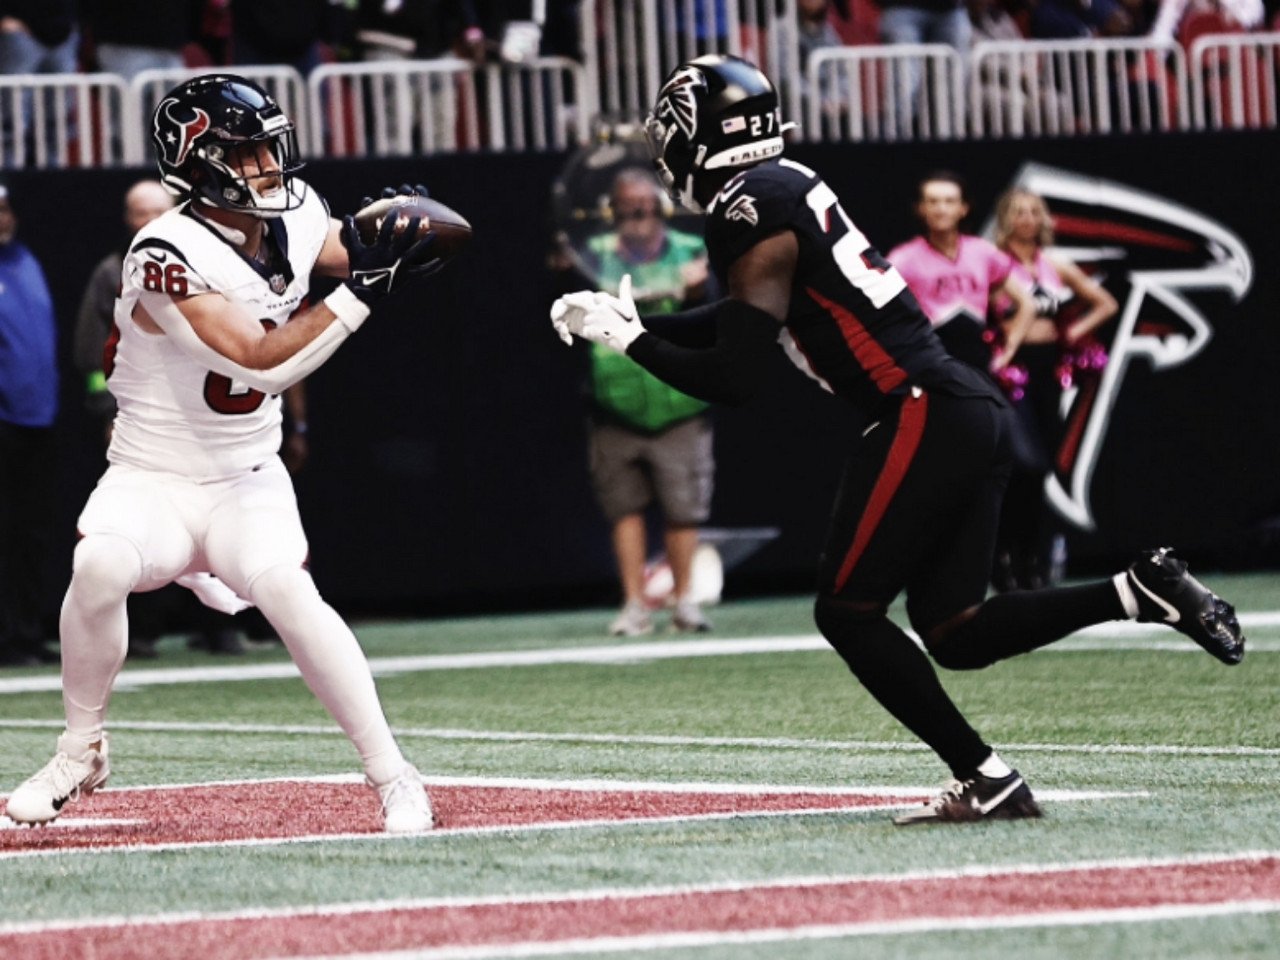 Highlights: New Orleans Saints 13-20 Houston Texans in NFL